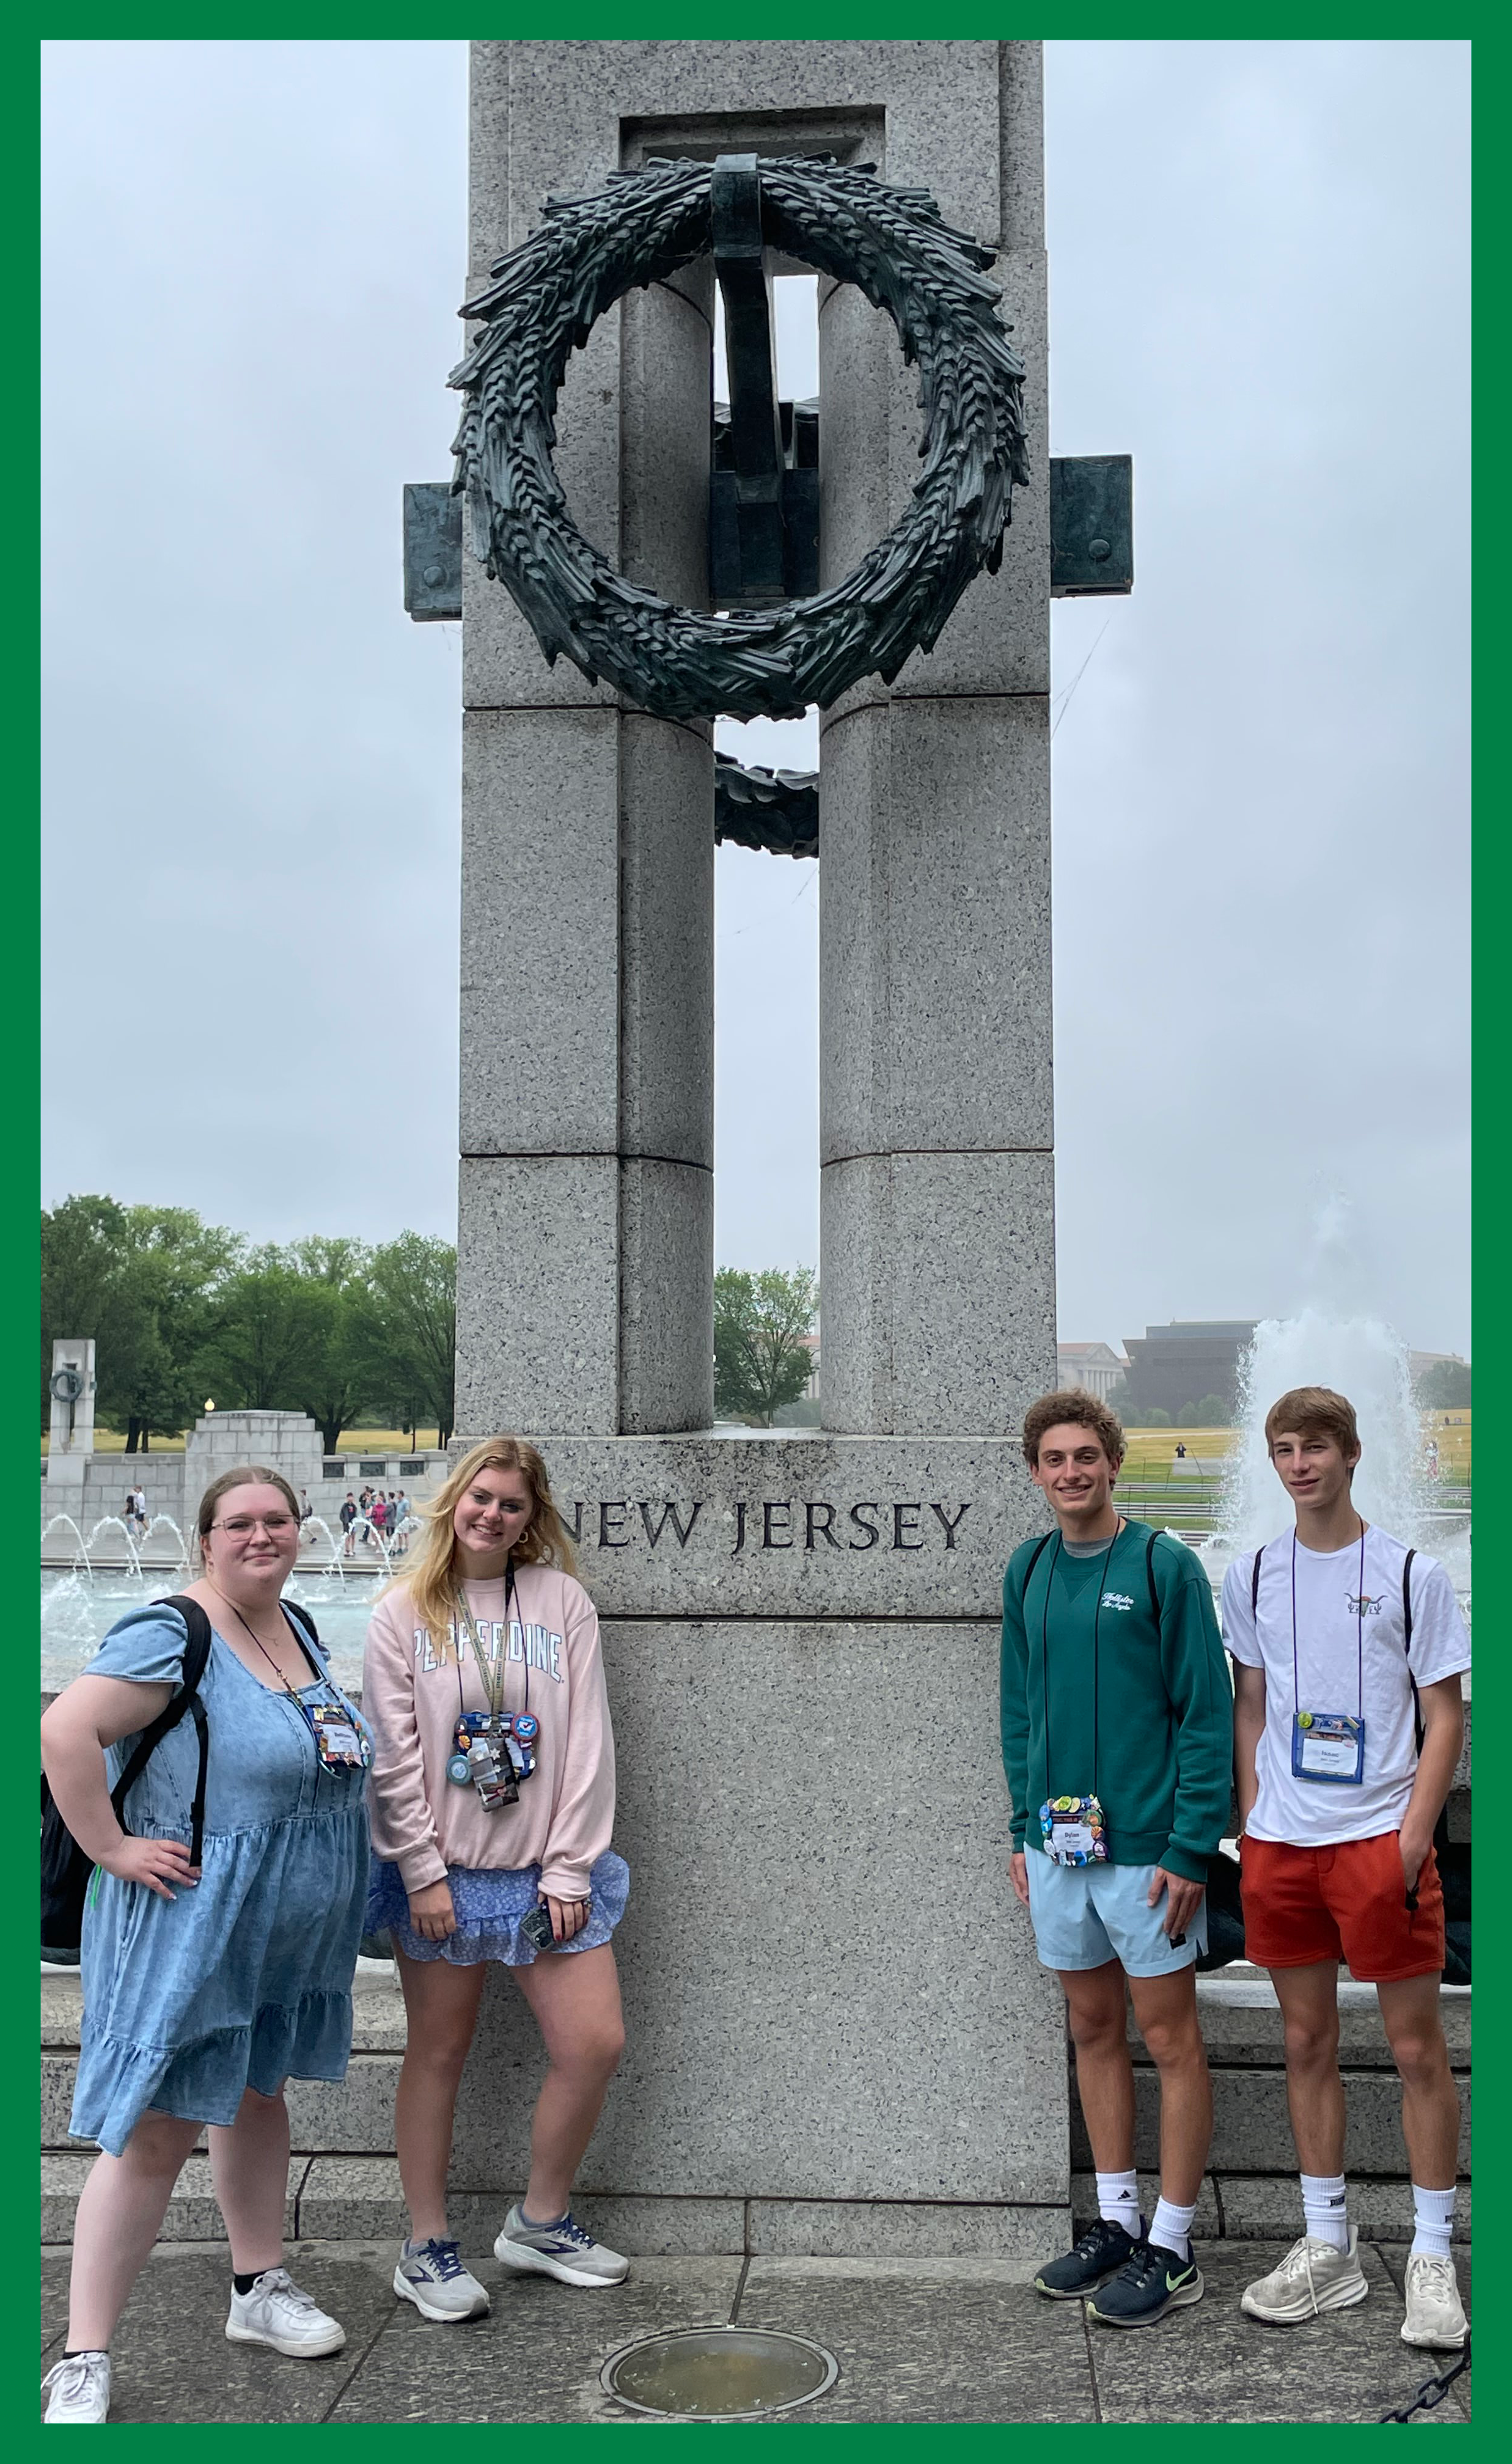 NJ Youth Tour students pose at the New Jersey memorial at the World War II Memorial in Washington, D.C.